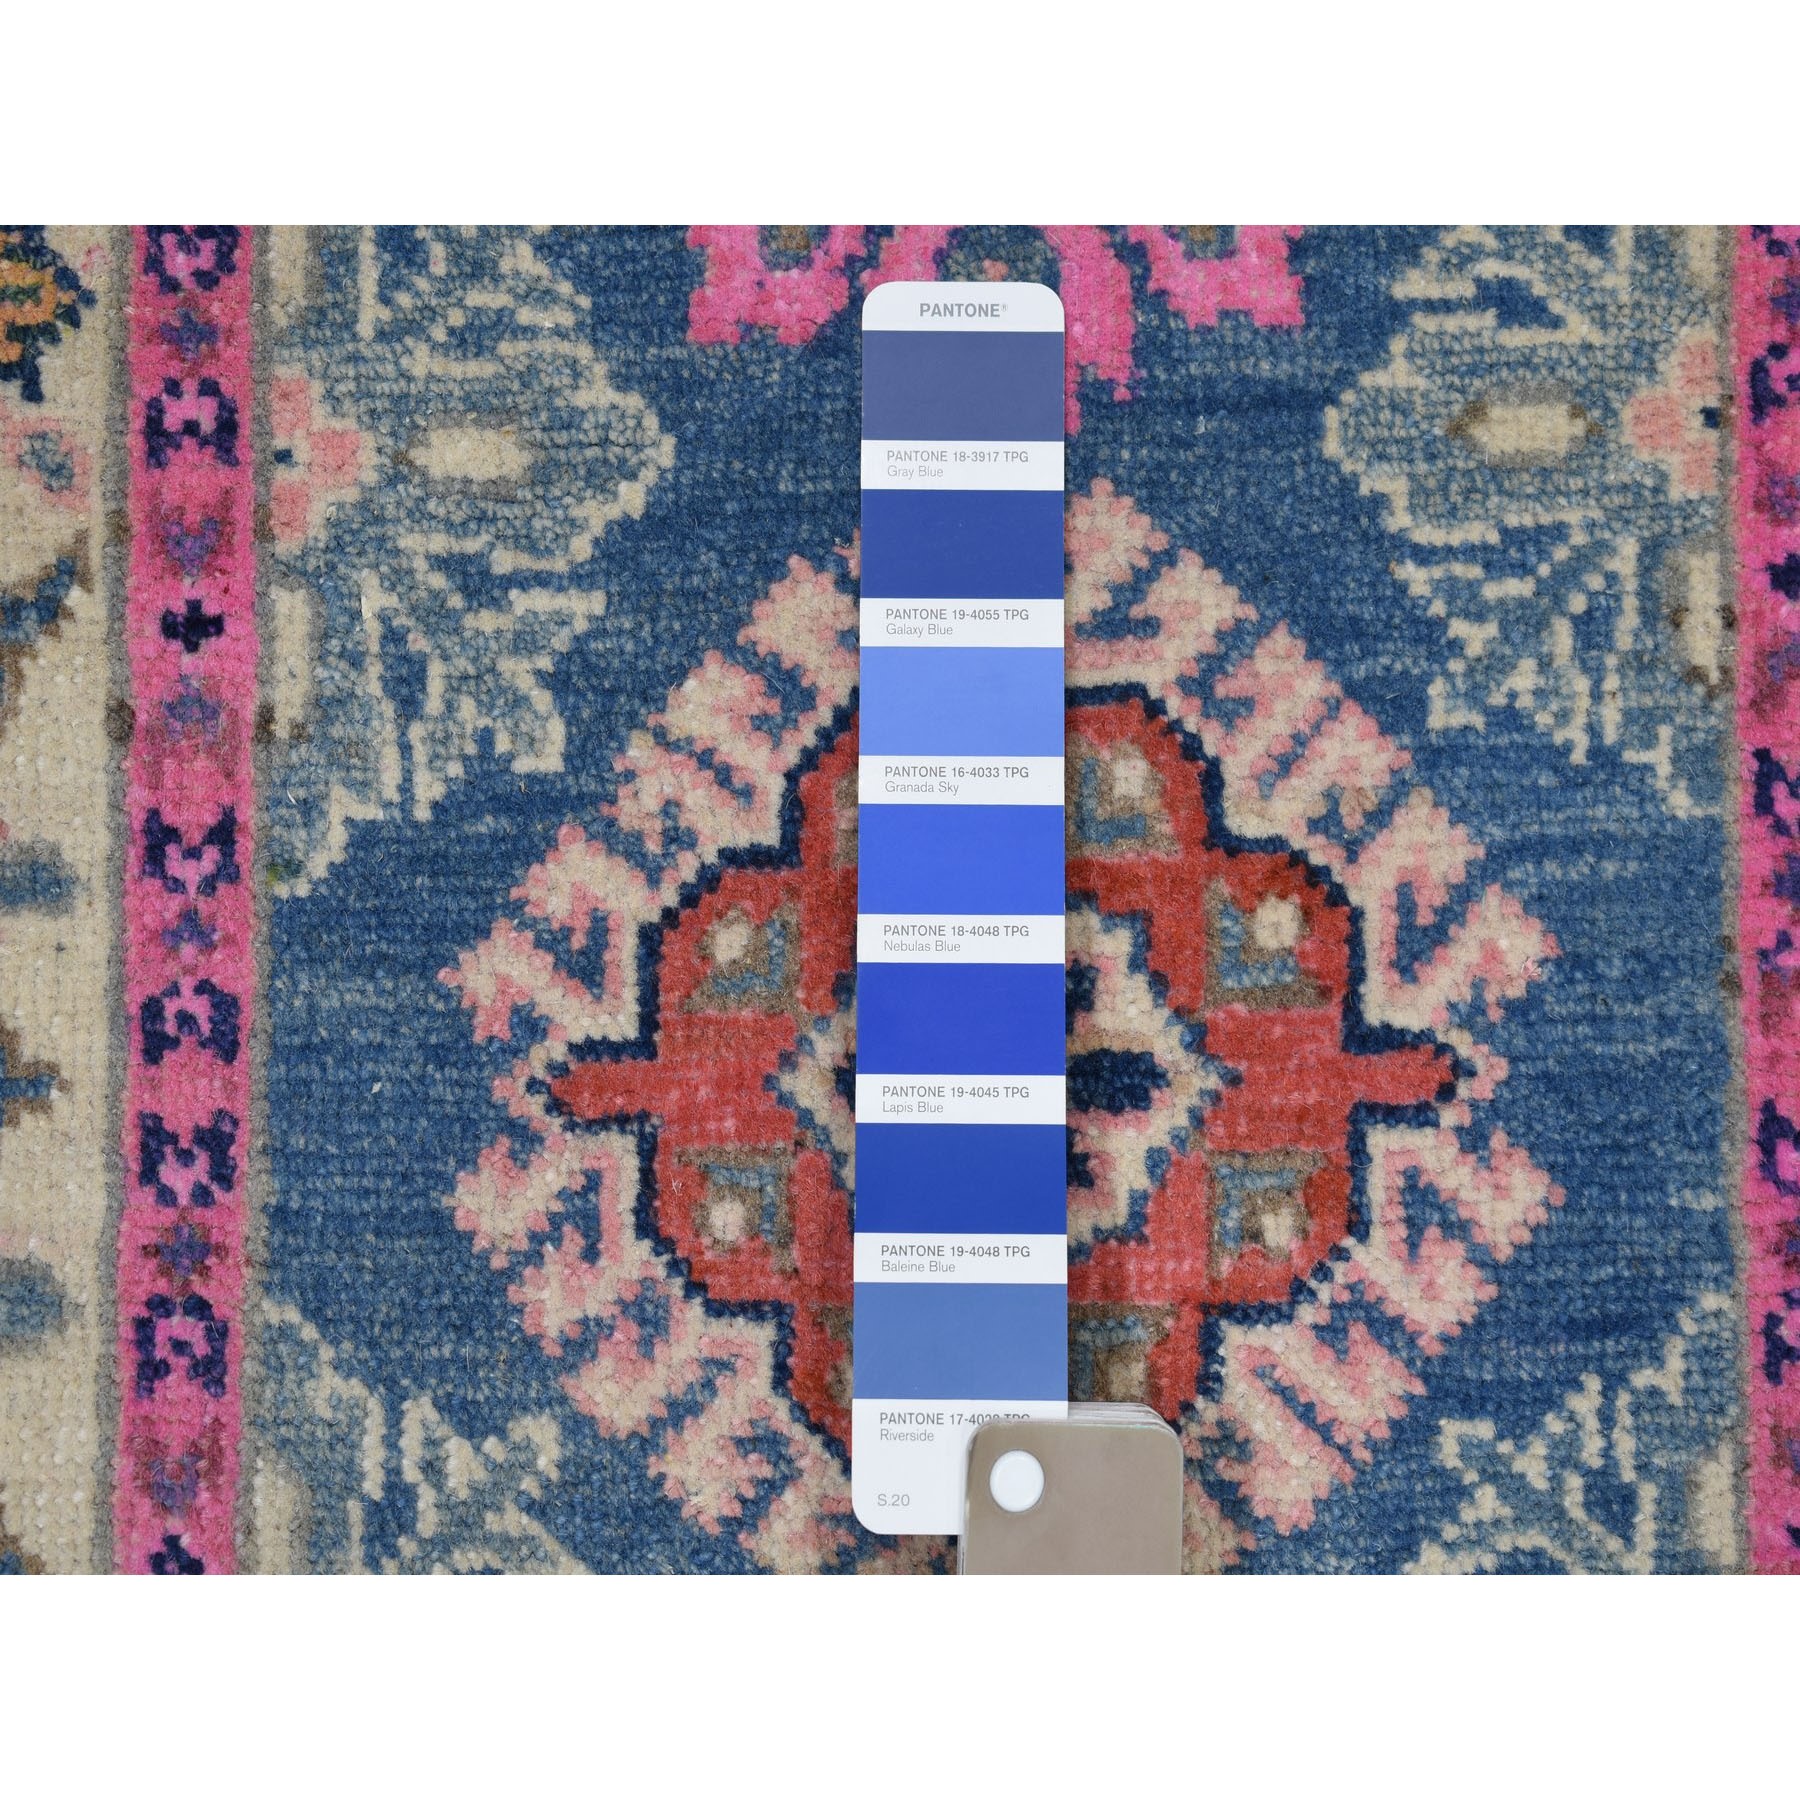 2-2 x2-10  Colorful Blue Fusion Kazak Pure Wool Geometric Design Hand Knotted Oriental Rug 